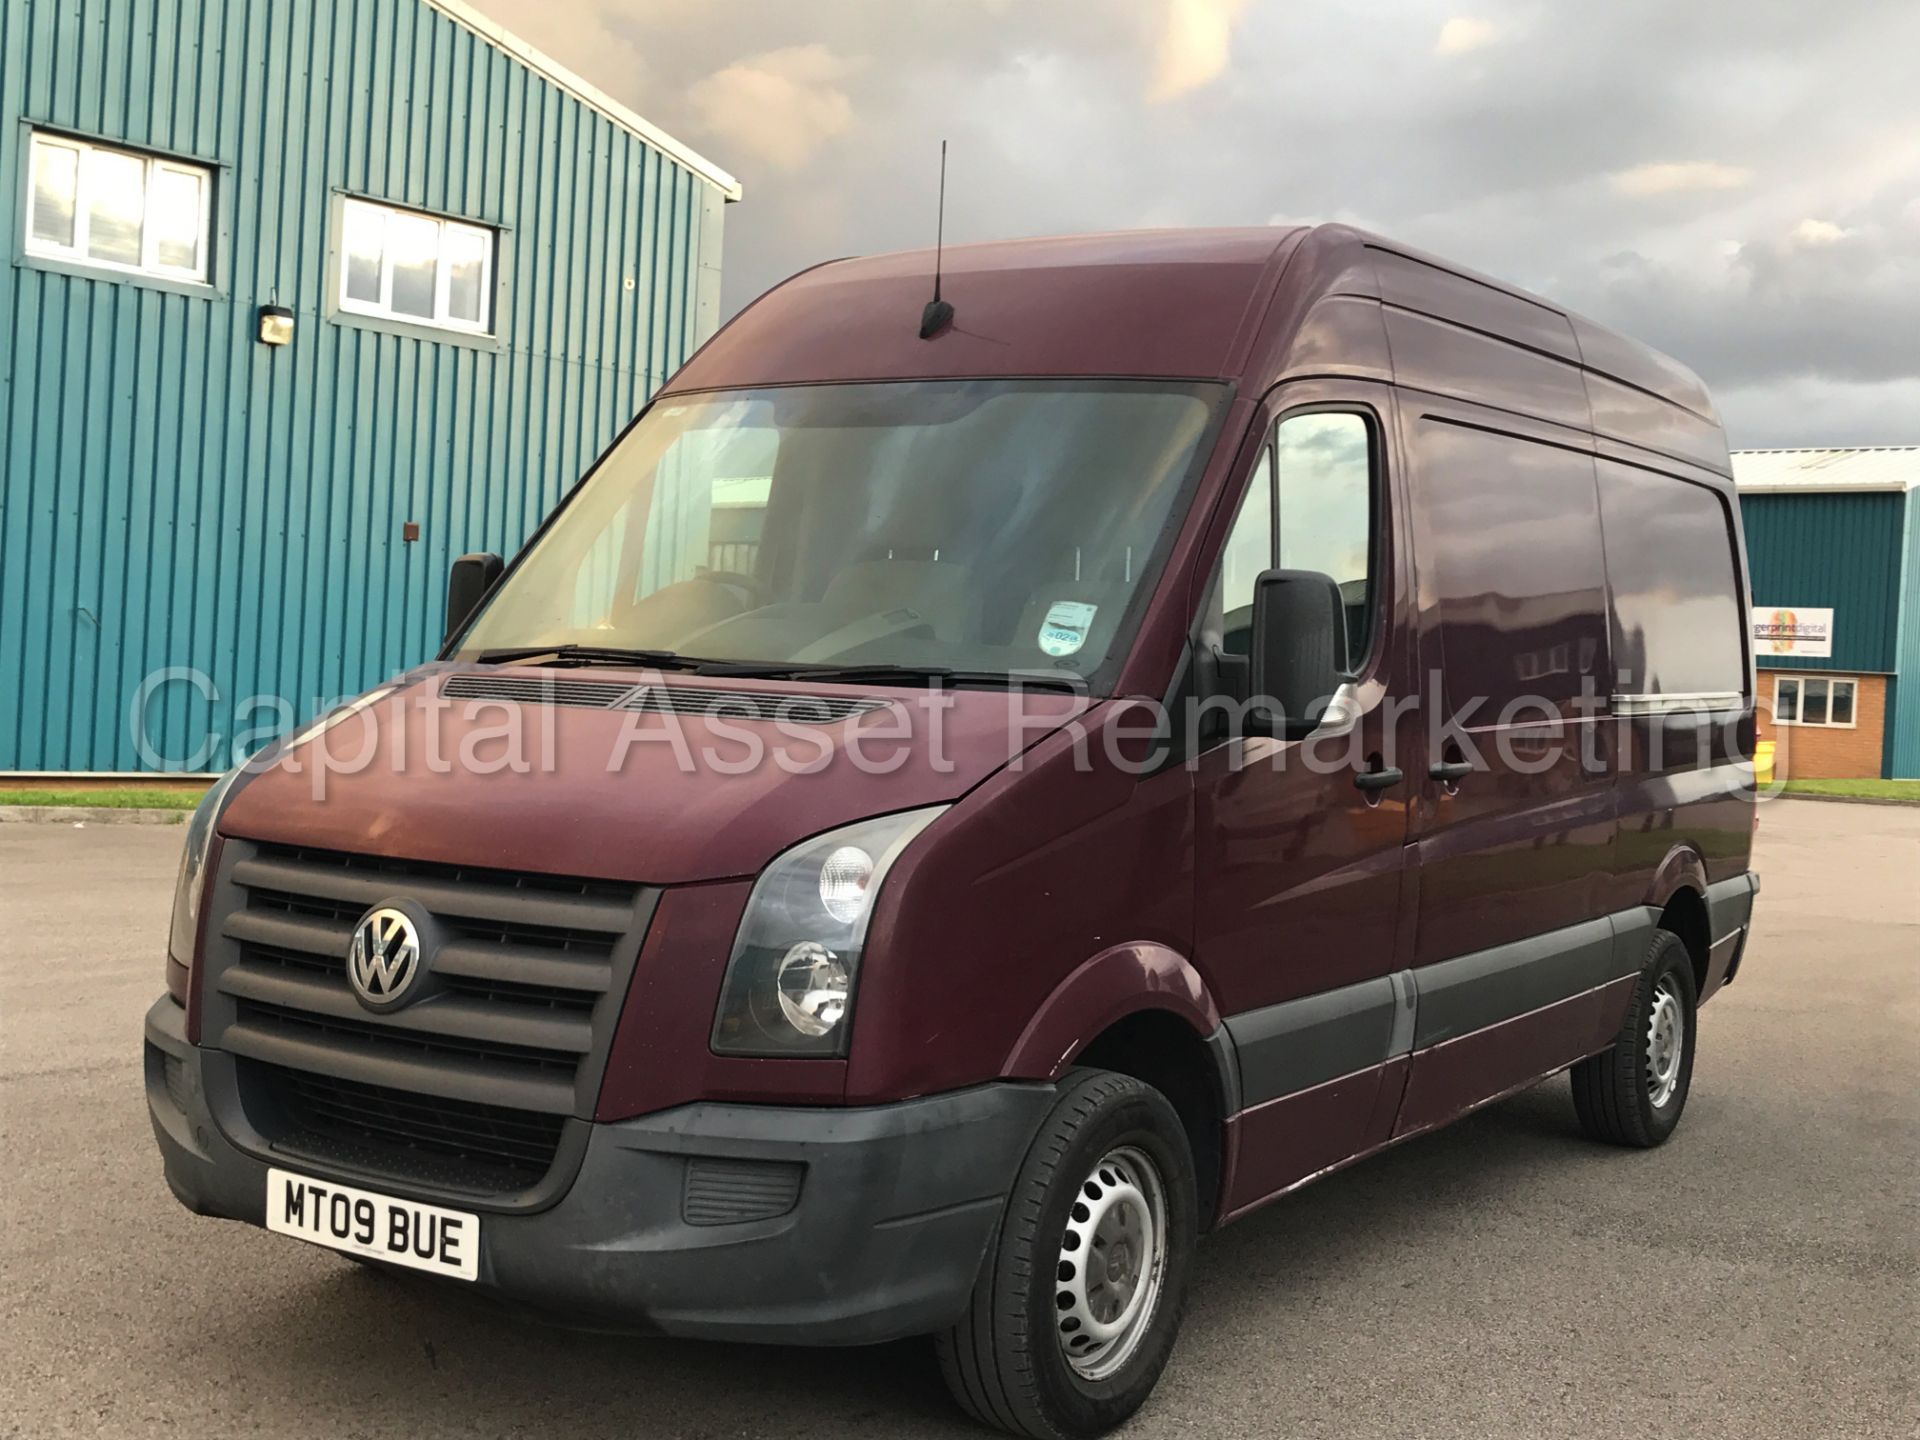 (On Sale) VOLKSWAGEN CRAFTER CR35 'MWB HI-ROOF' (2009) '2.5 TDI - 109 PS - 6 SPEED' **LOW MILES** - Image 3 of 26